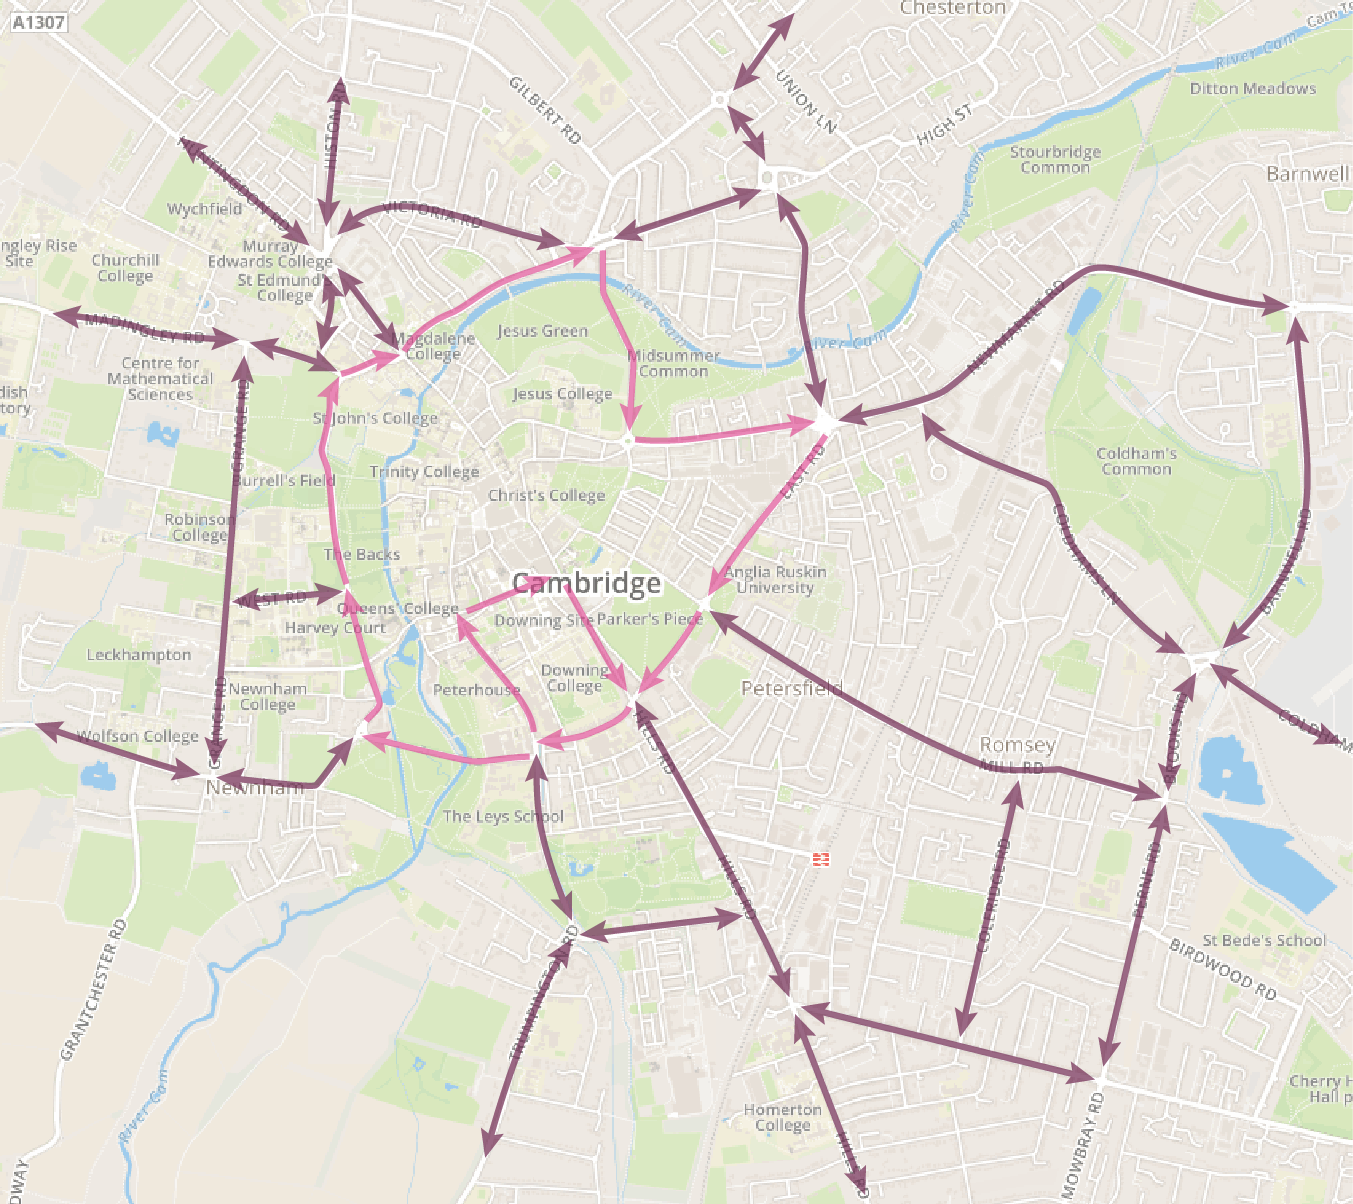 Main routes for general traffic